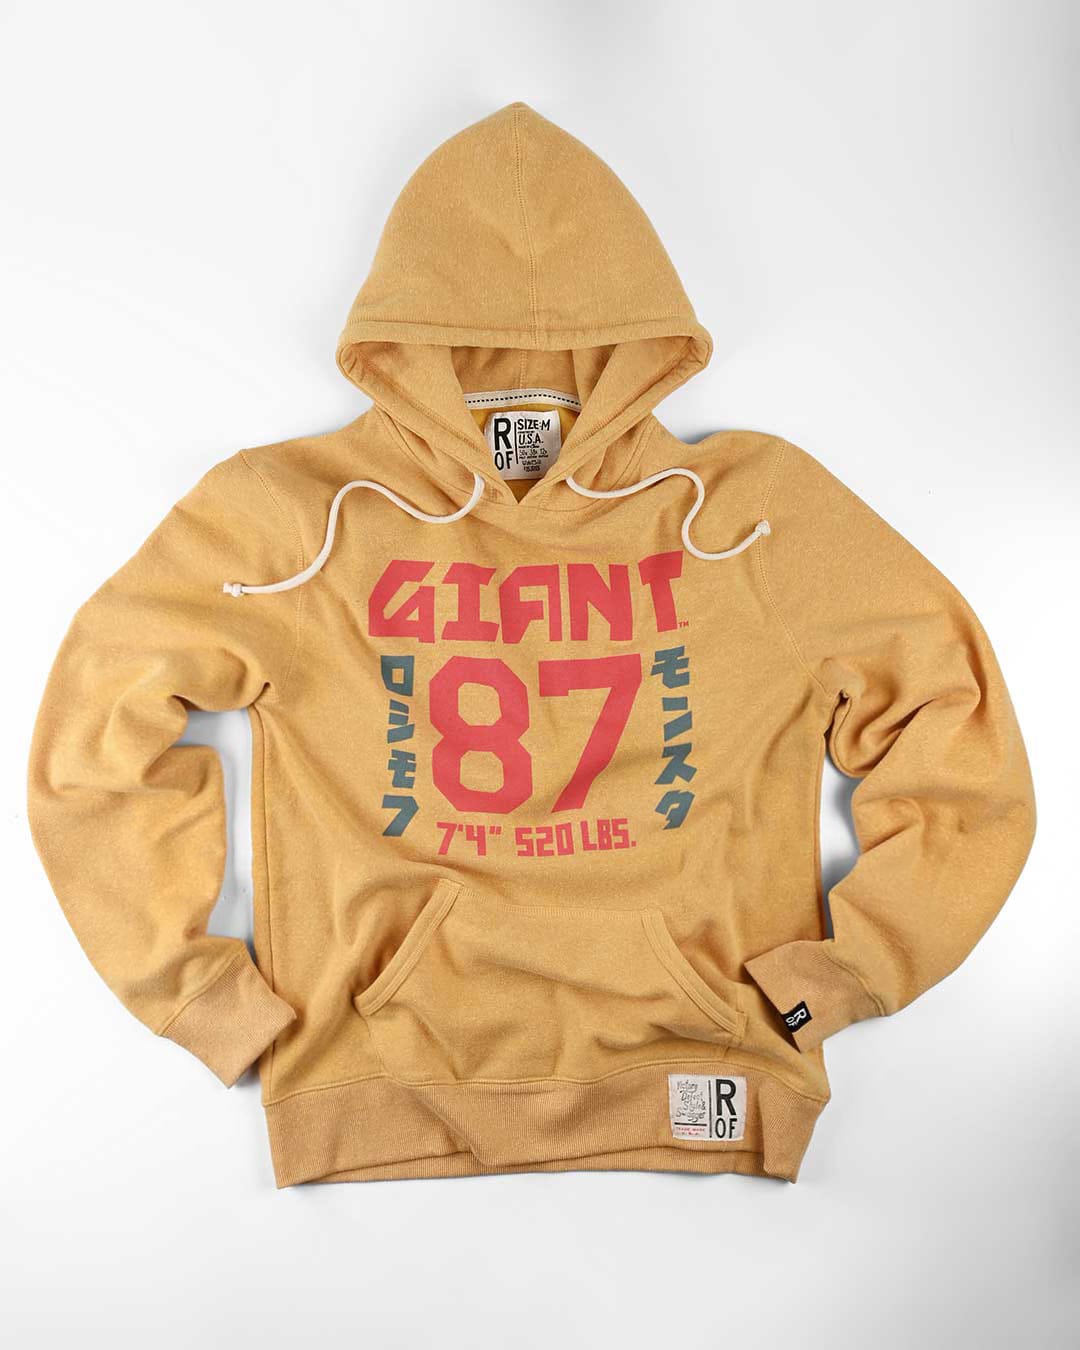 Andre the Giant &#39;87 Yellow PO Hoody - Roots of Fight